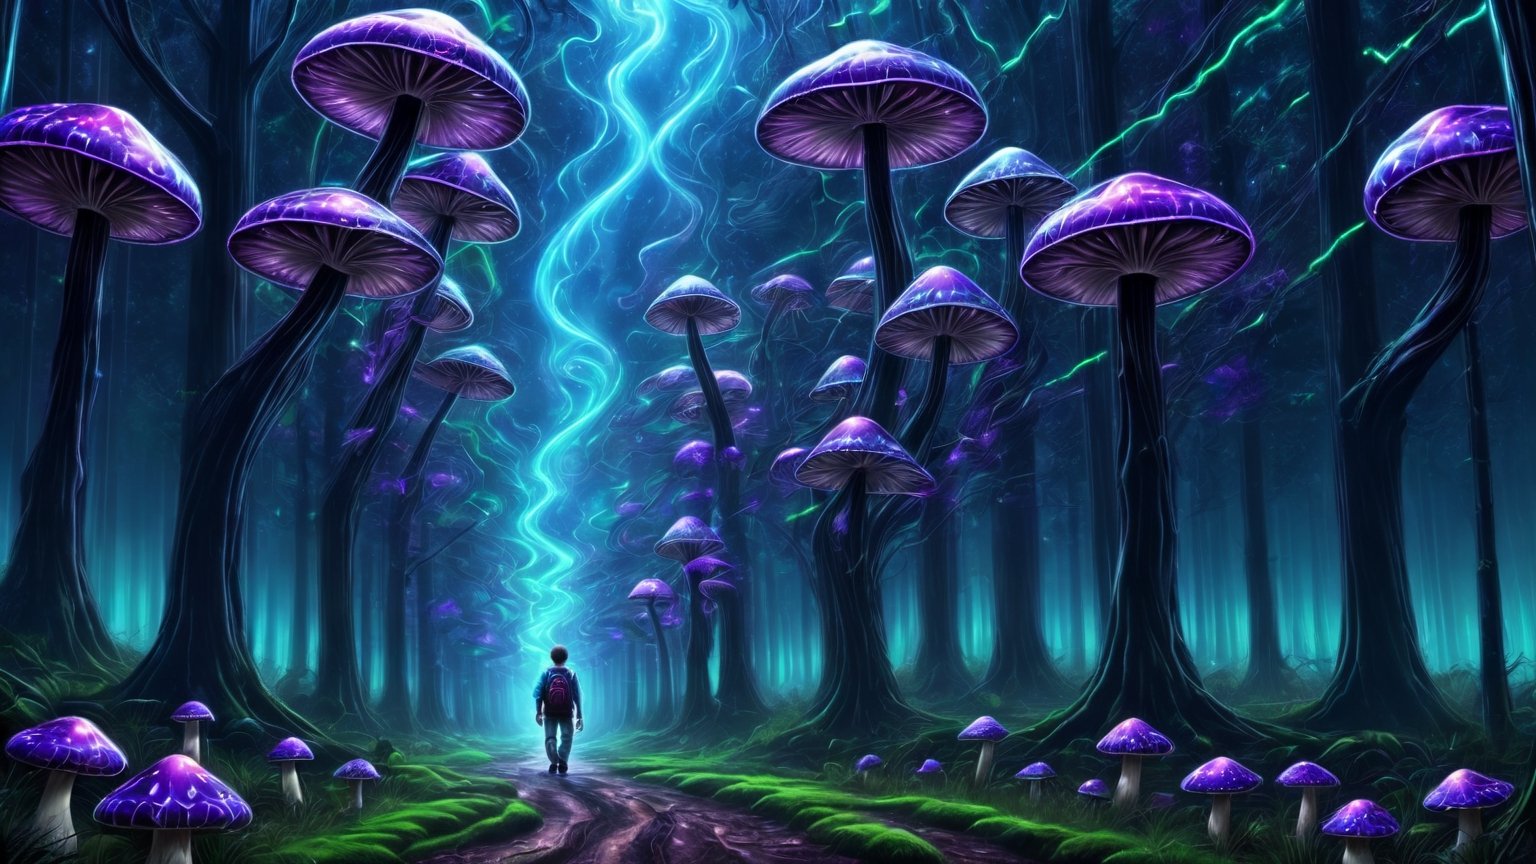 Higher ground, a forest of big vivid mushrooms, fluorescent blue style, a path to a door, a young boy with a bagpack, a giant door
